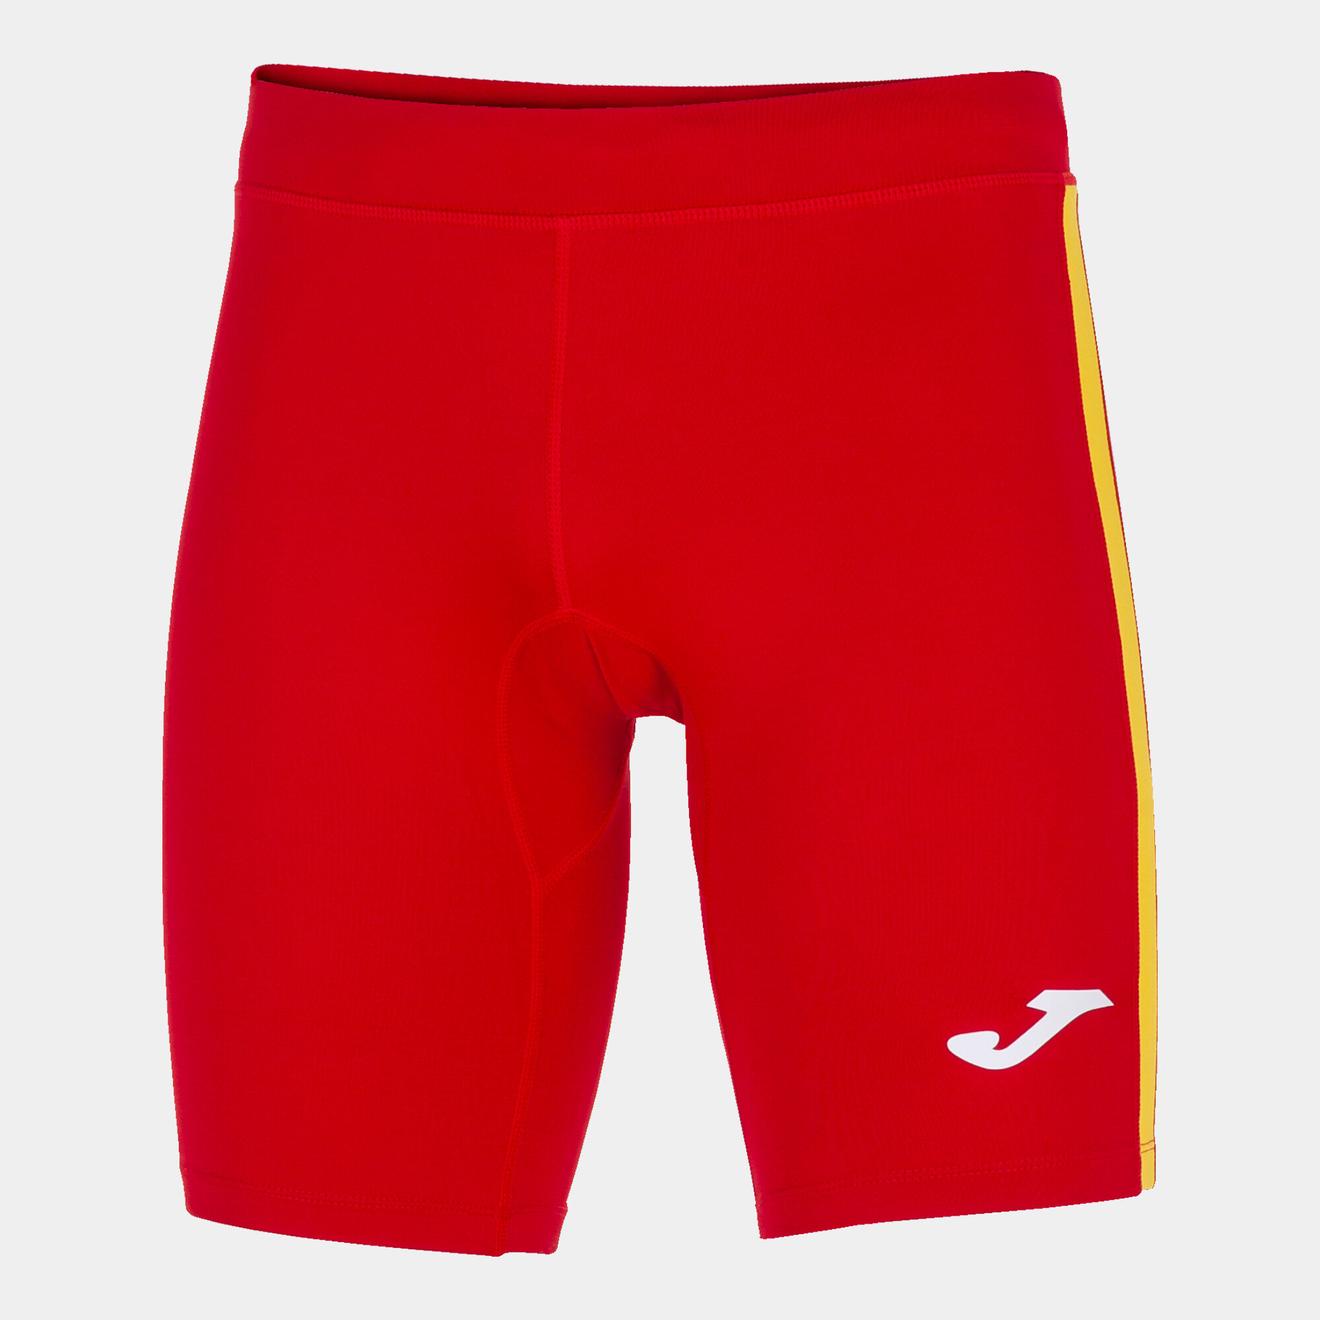 Short tights man Elite VII red yellow offers at £12.5 in Joma